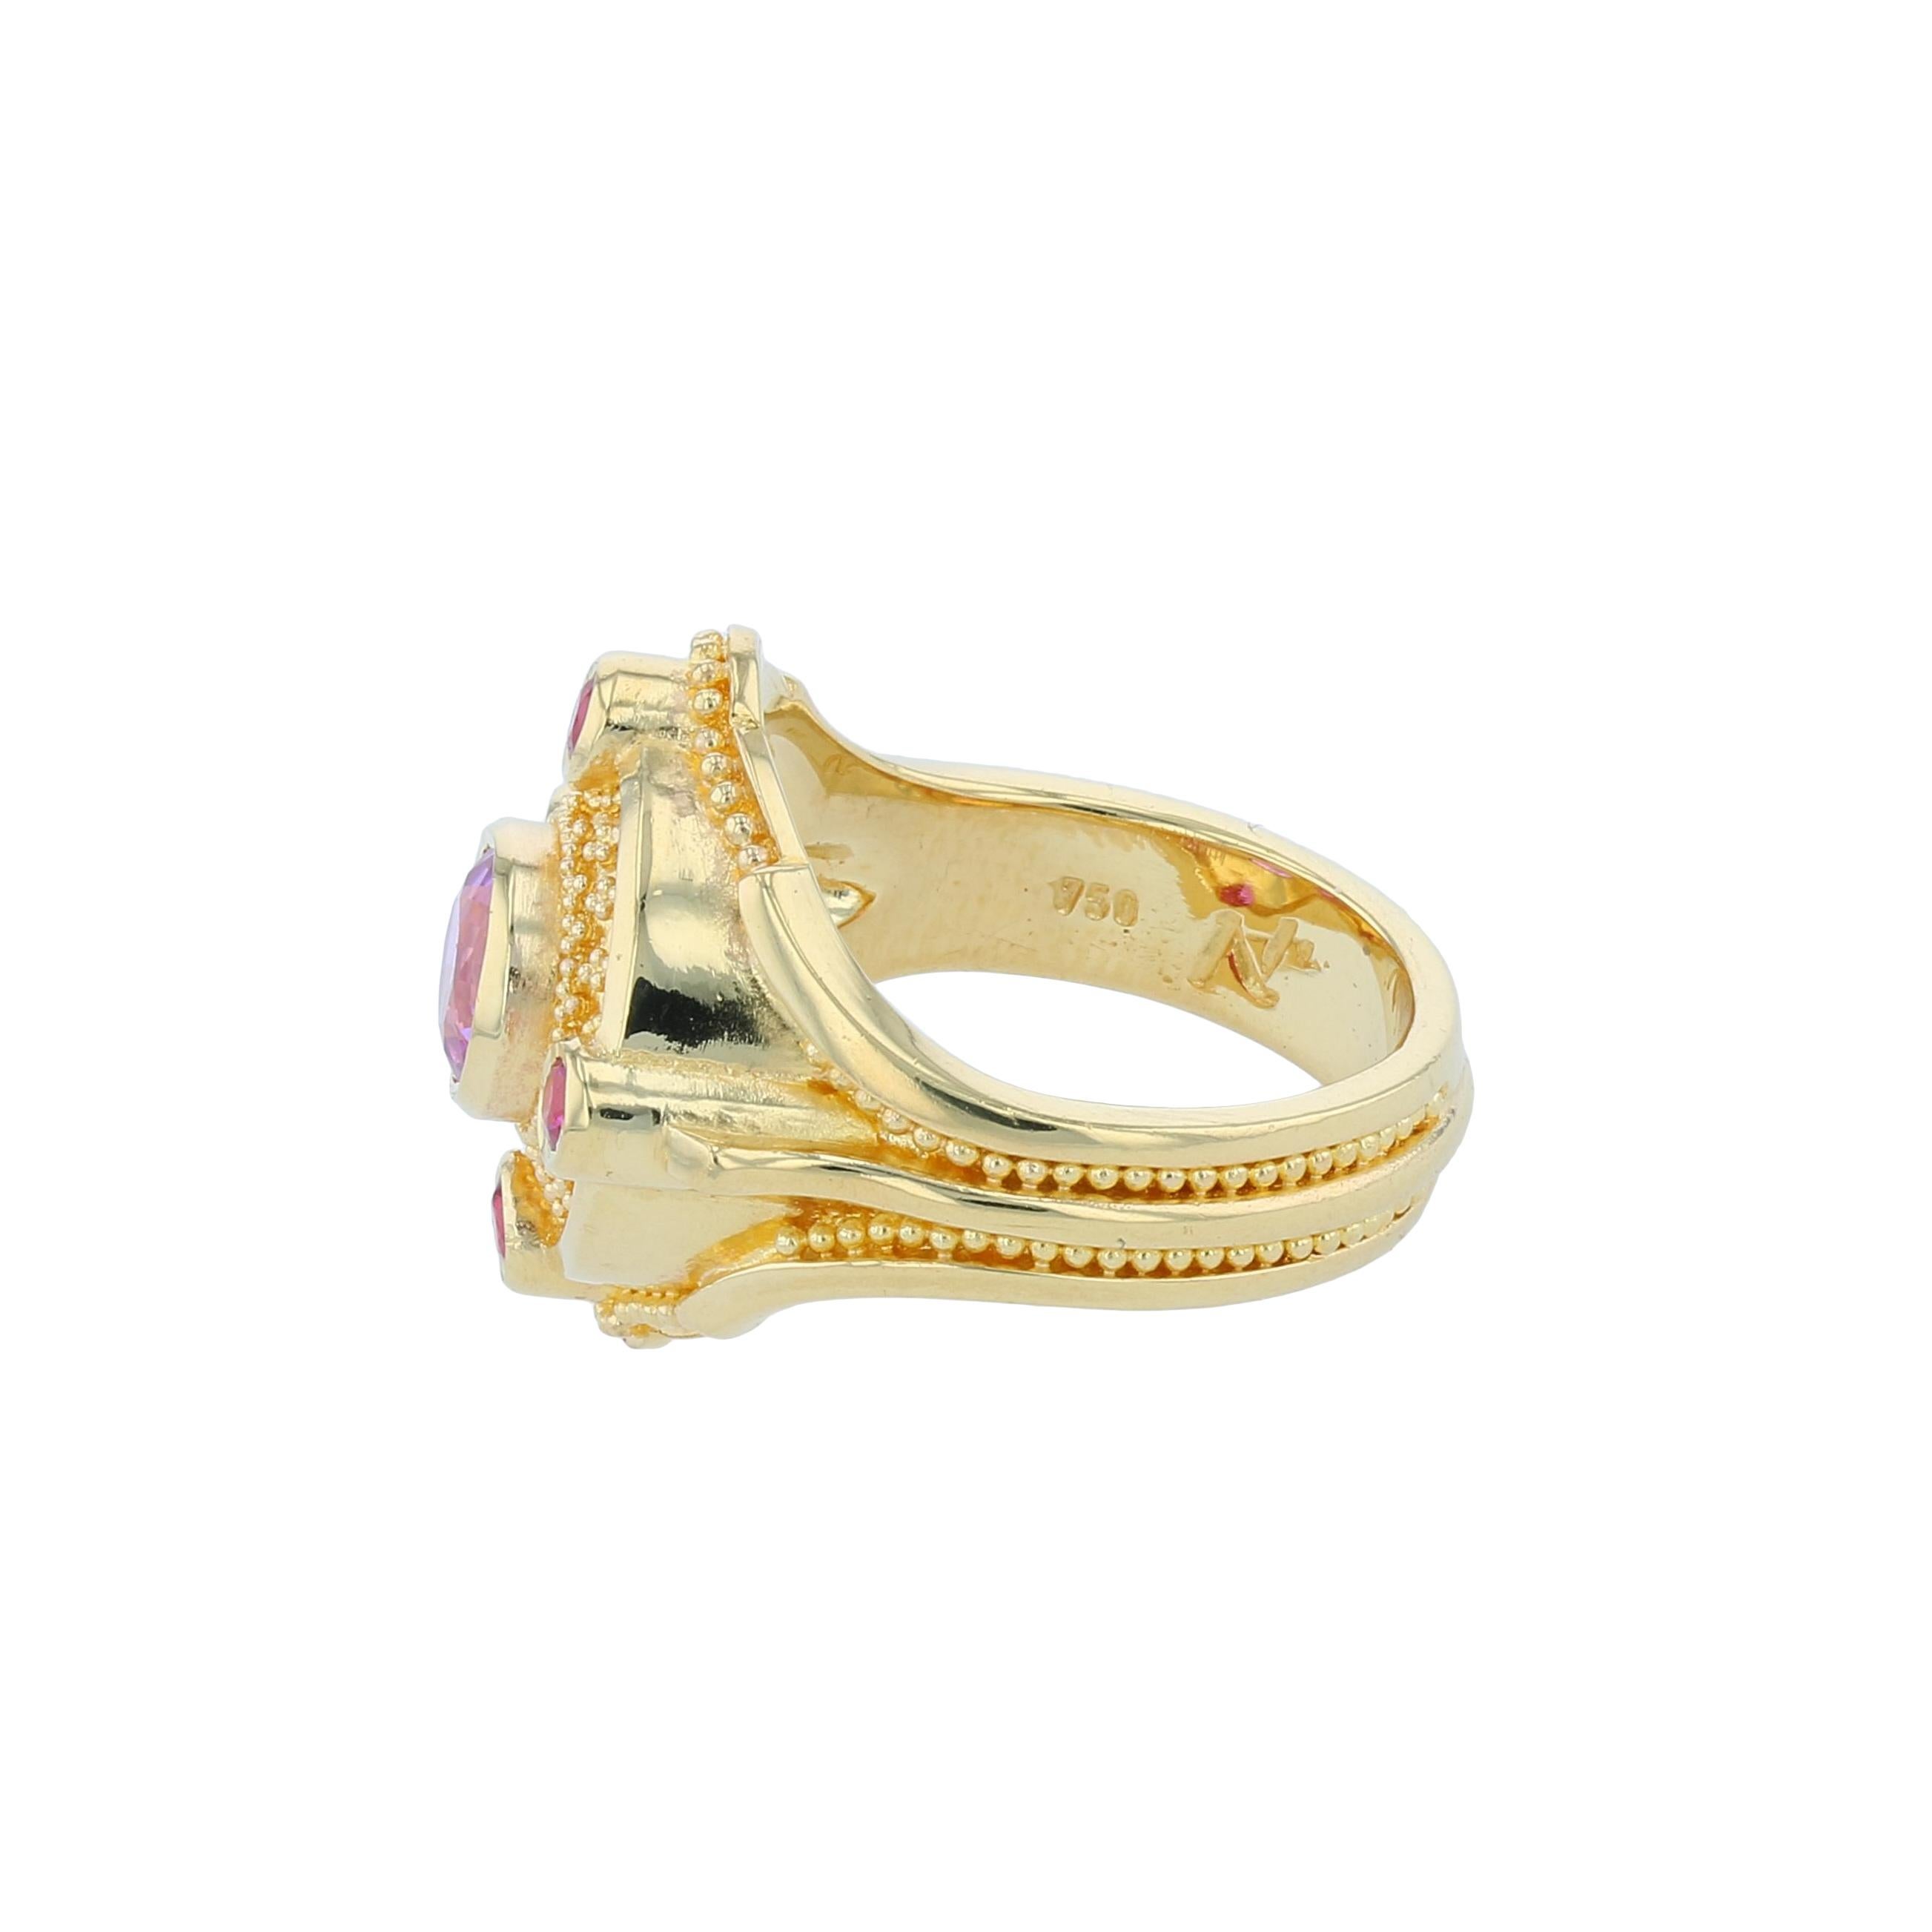 Mixed Cut Kent Raible's 18 Karat Gold Pink Sapphire Cocktail Ring with Fine Granulation